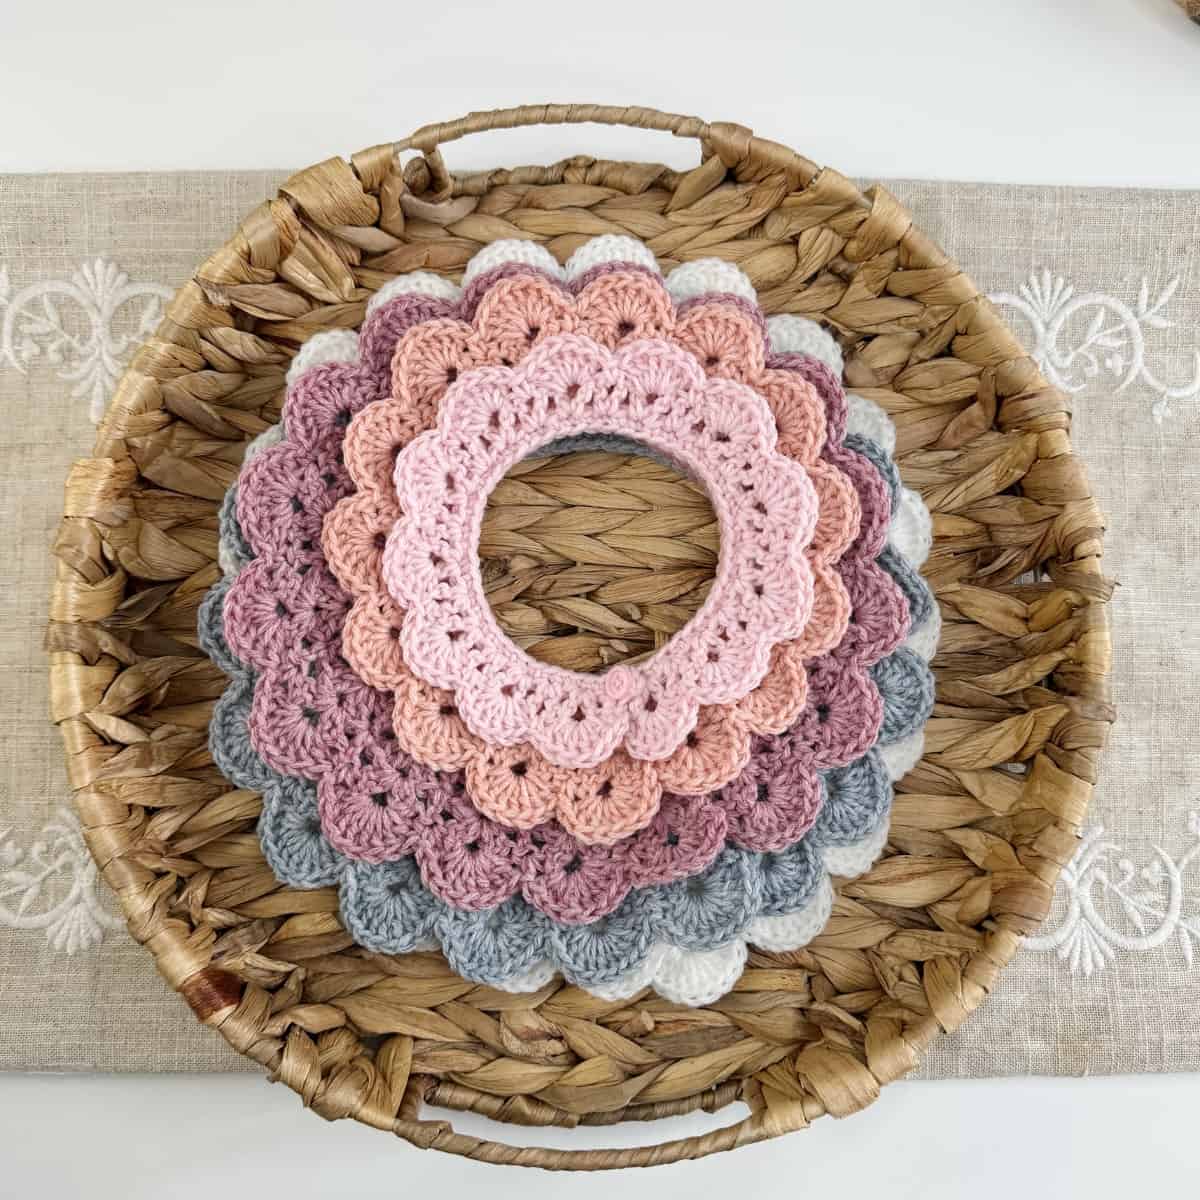 Crocheted doilies in a basket on a table.